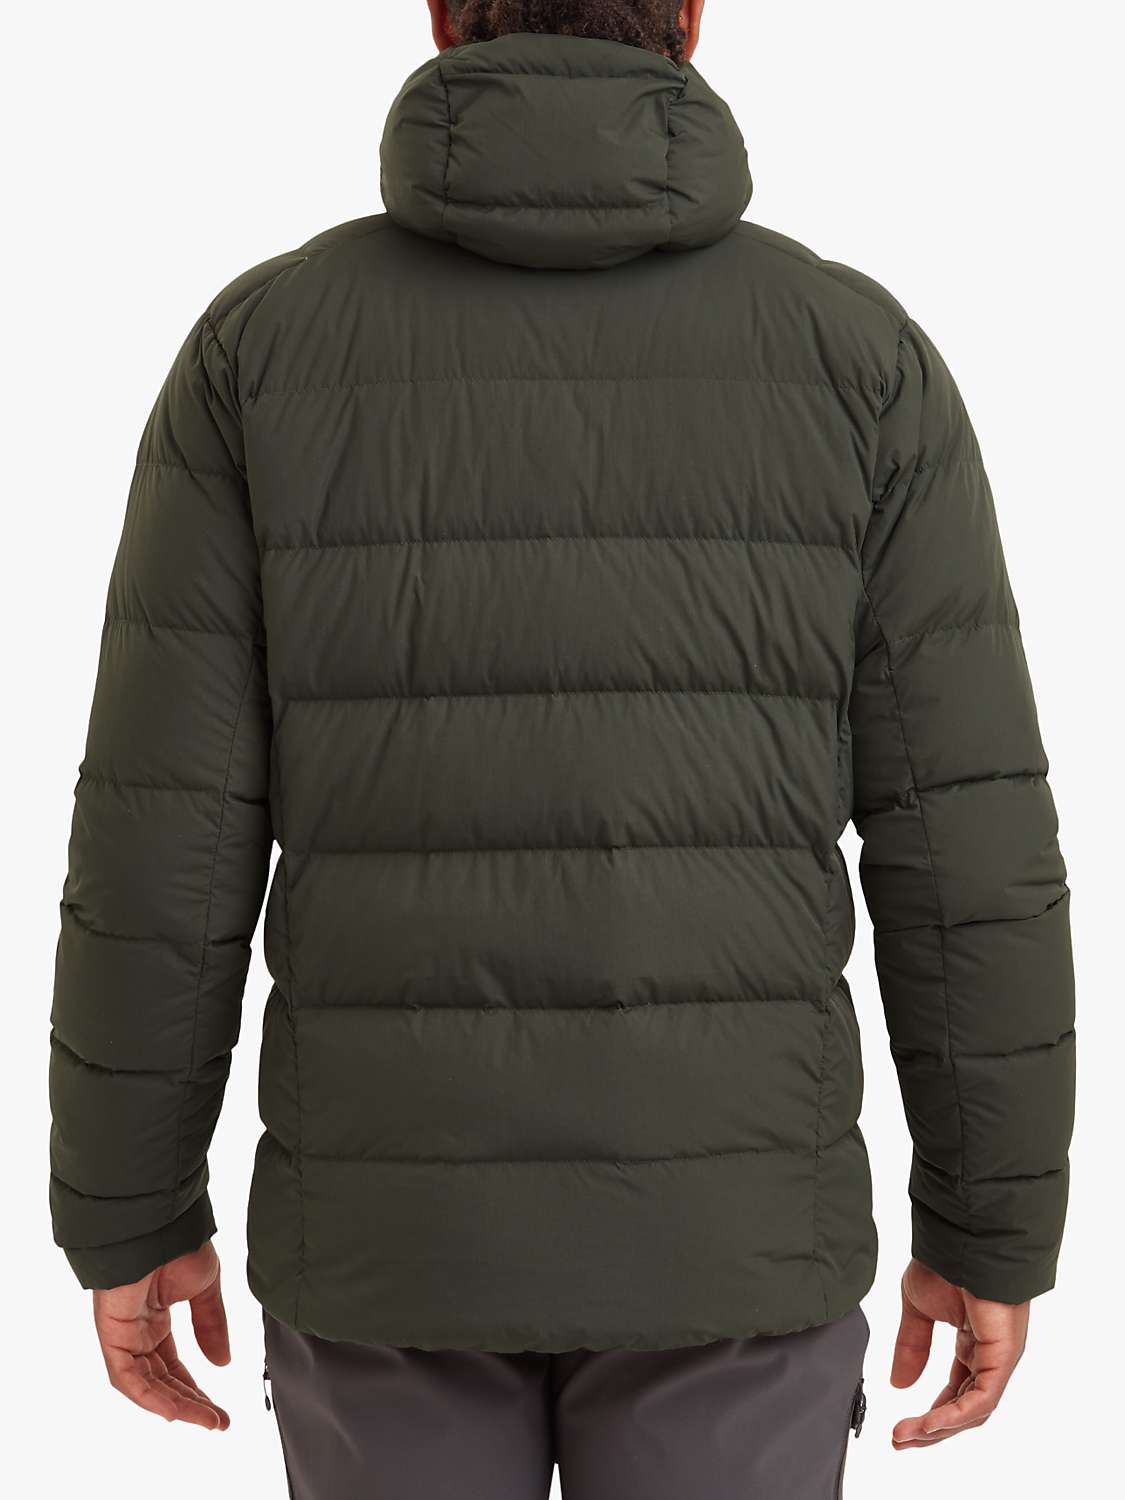 Buy Montane Tundra Men's Recycled Down Puffer Jacket Online at johnlewis.com